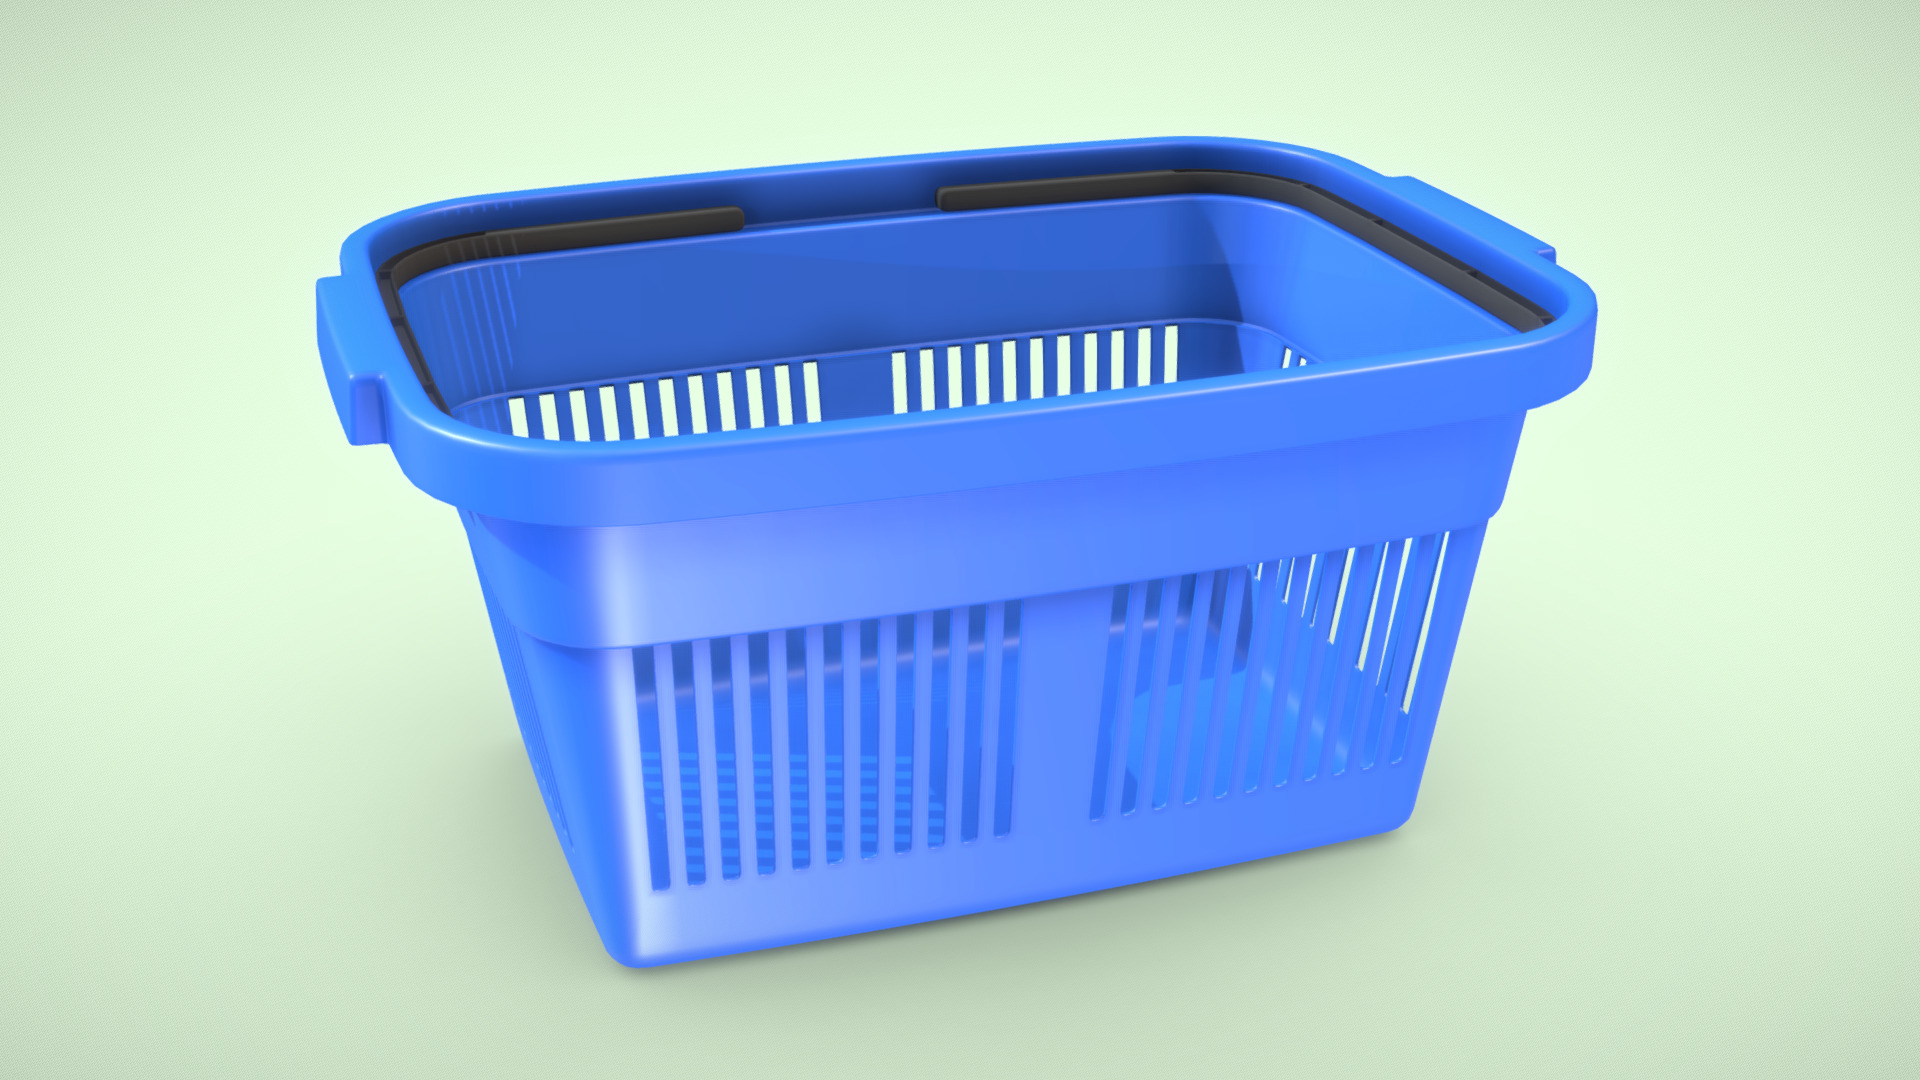 3D model Plastic Shopping Basket - This is a 3D model of the Plastic Shopping Basket. The 3D model is about a blue plastic container.